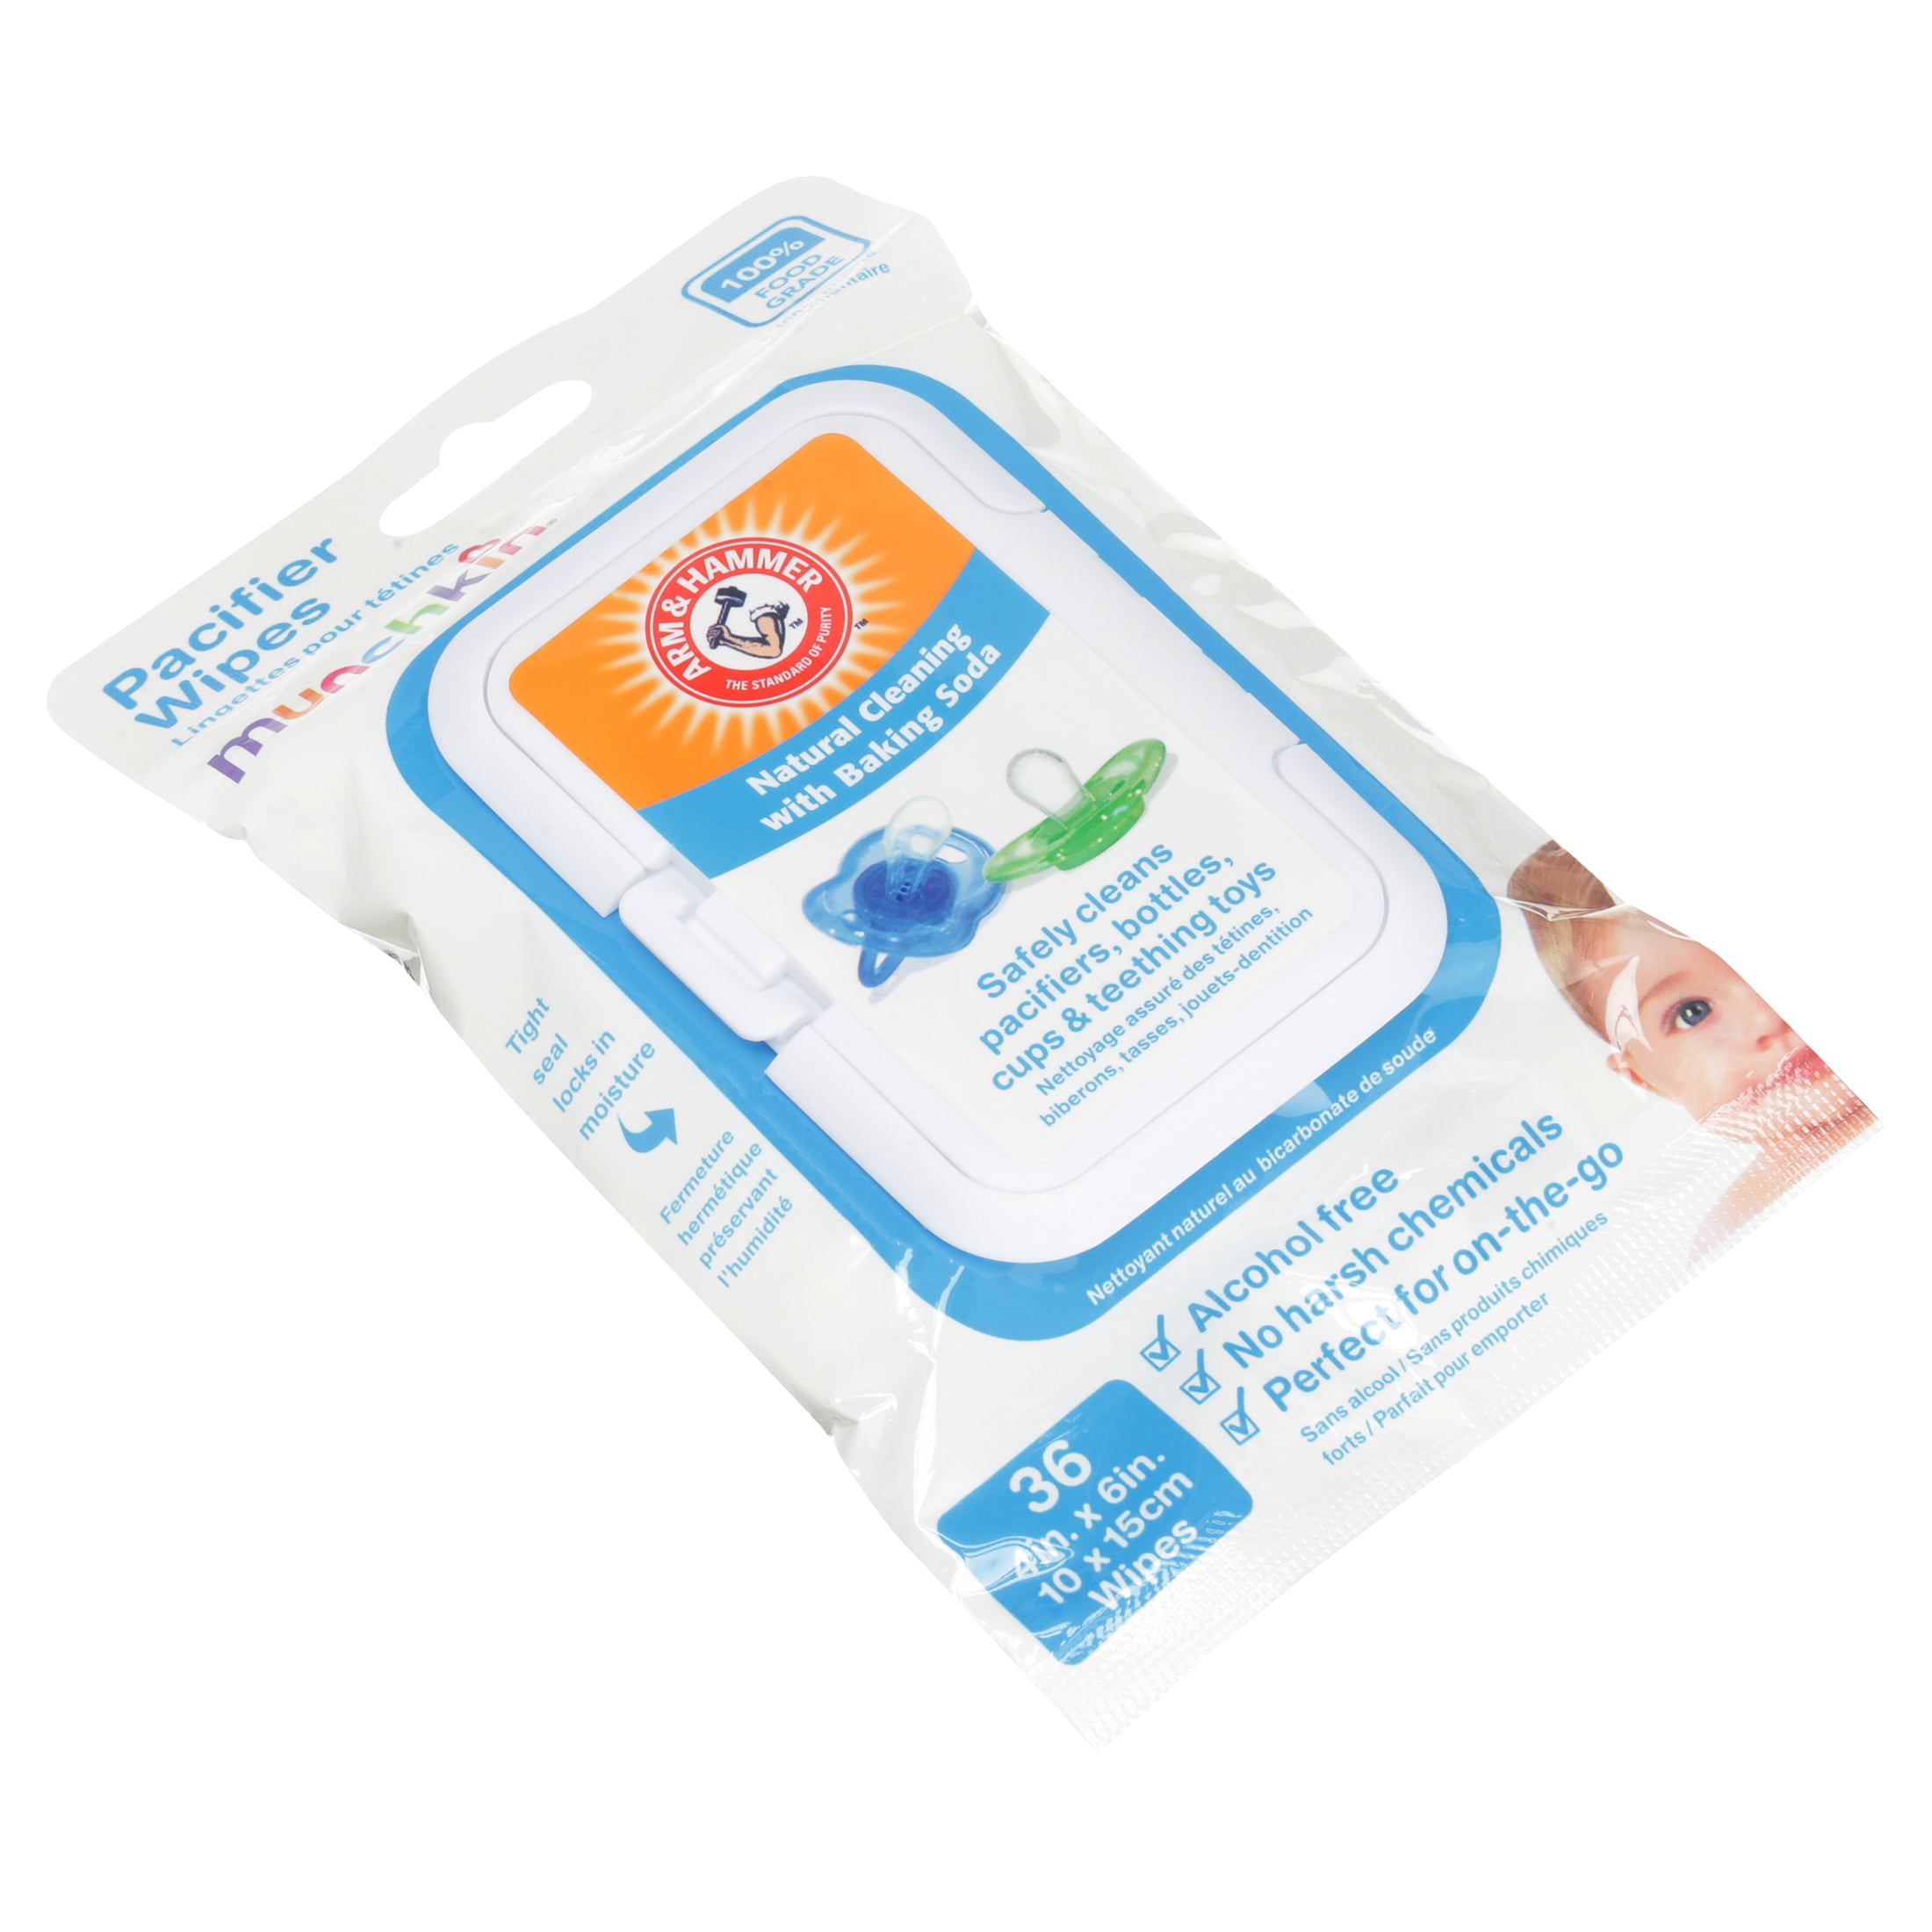 Munchkin Arm and Hammer Pacifier Wipes Ingredients and Reviews